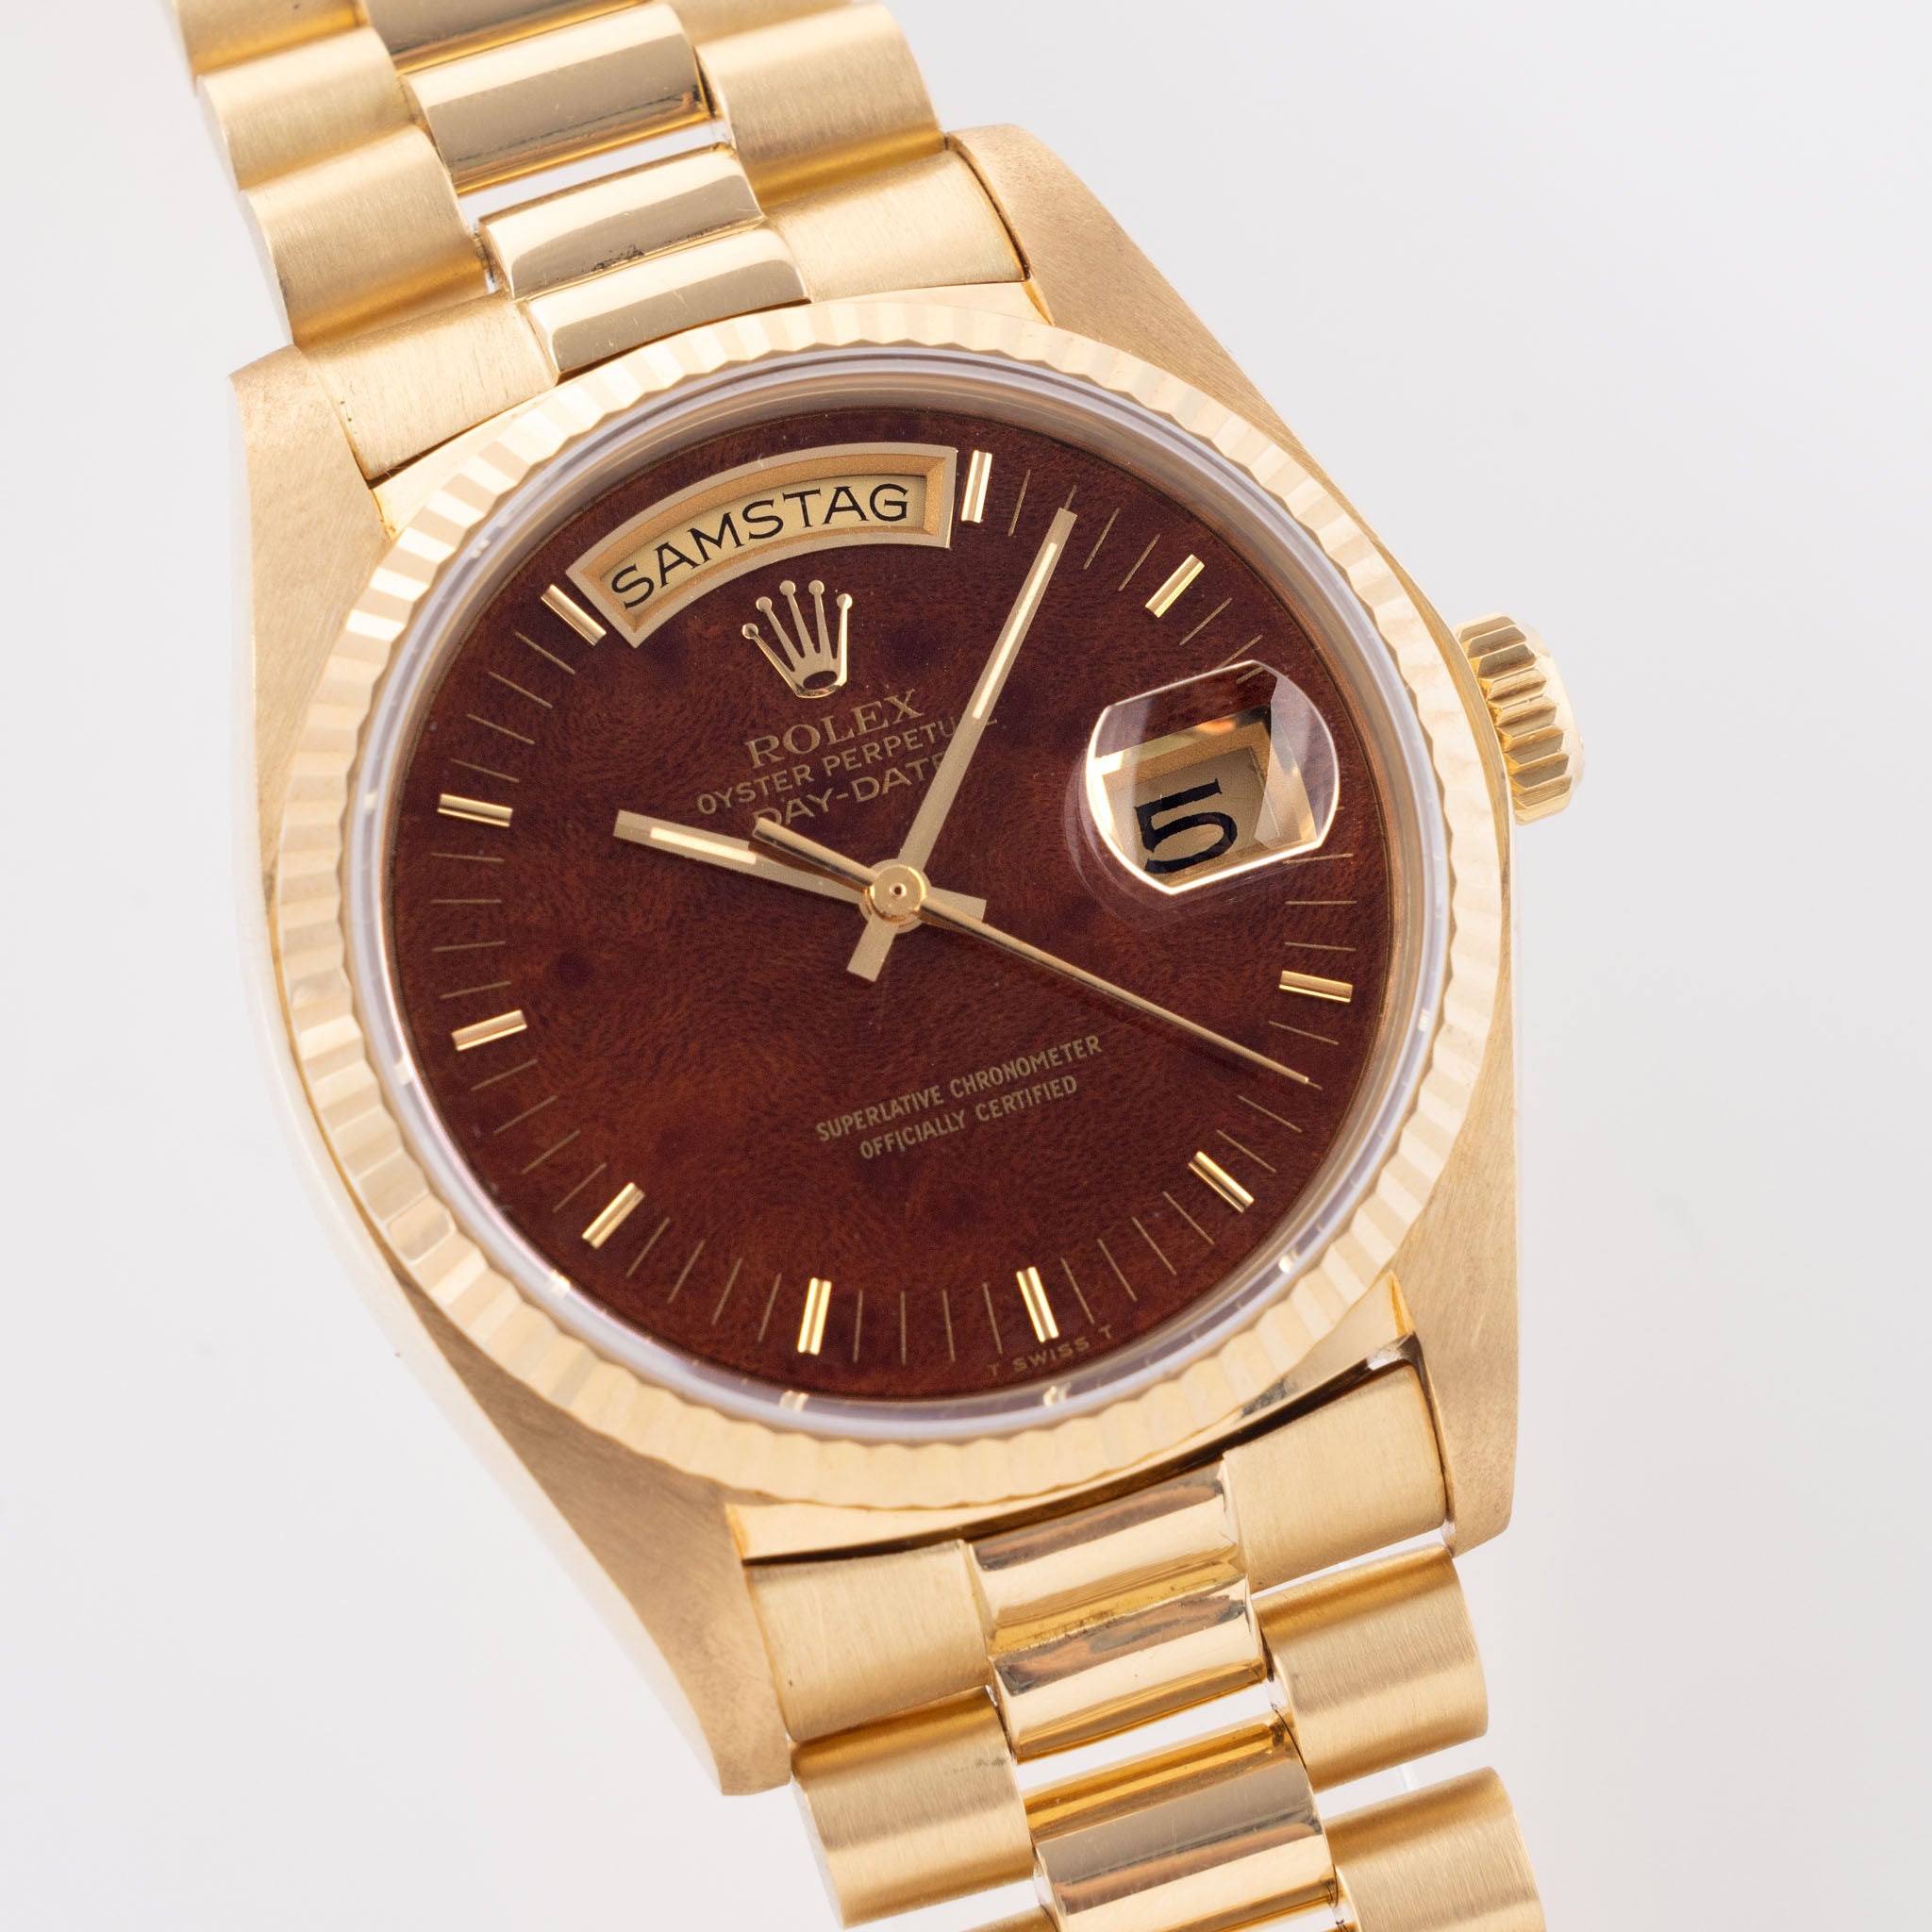 Rolex Day-Date Wood Dial Ref 18038 with Papers